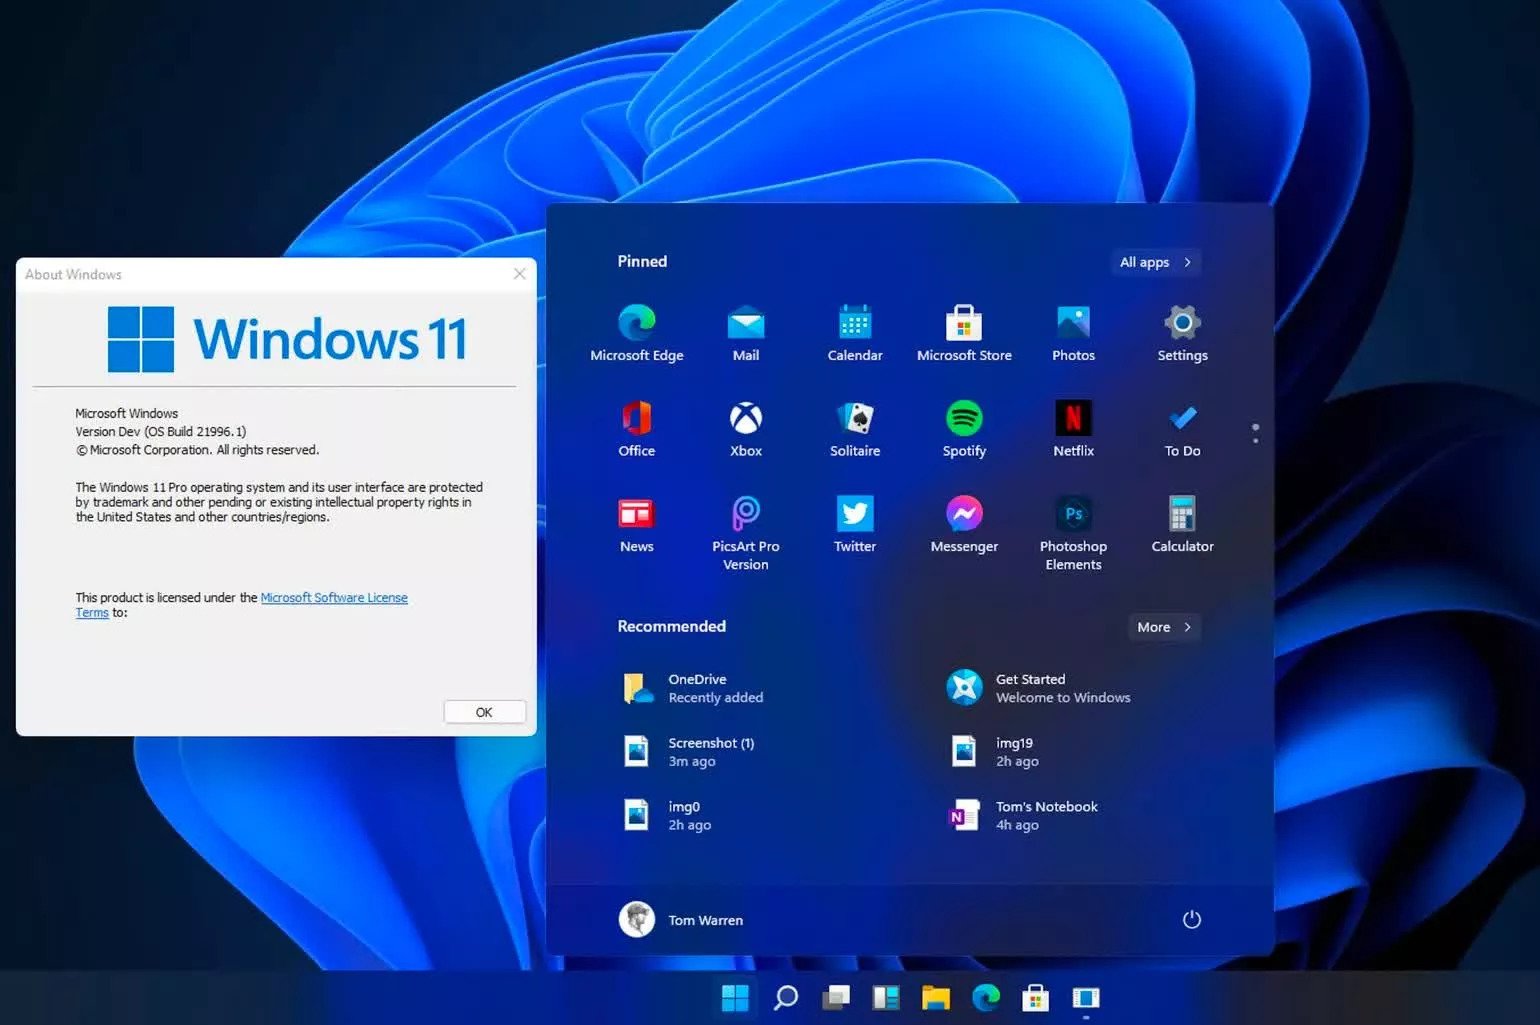 Former Microsoft Employee Criticizes Windows 11 for Being “Comically Bad” and “Unfinished”